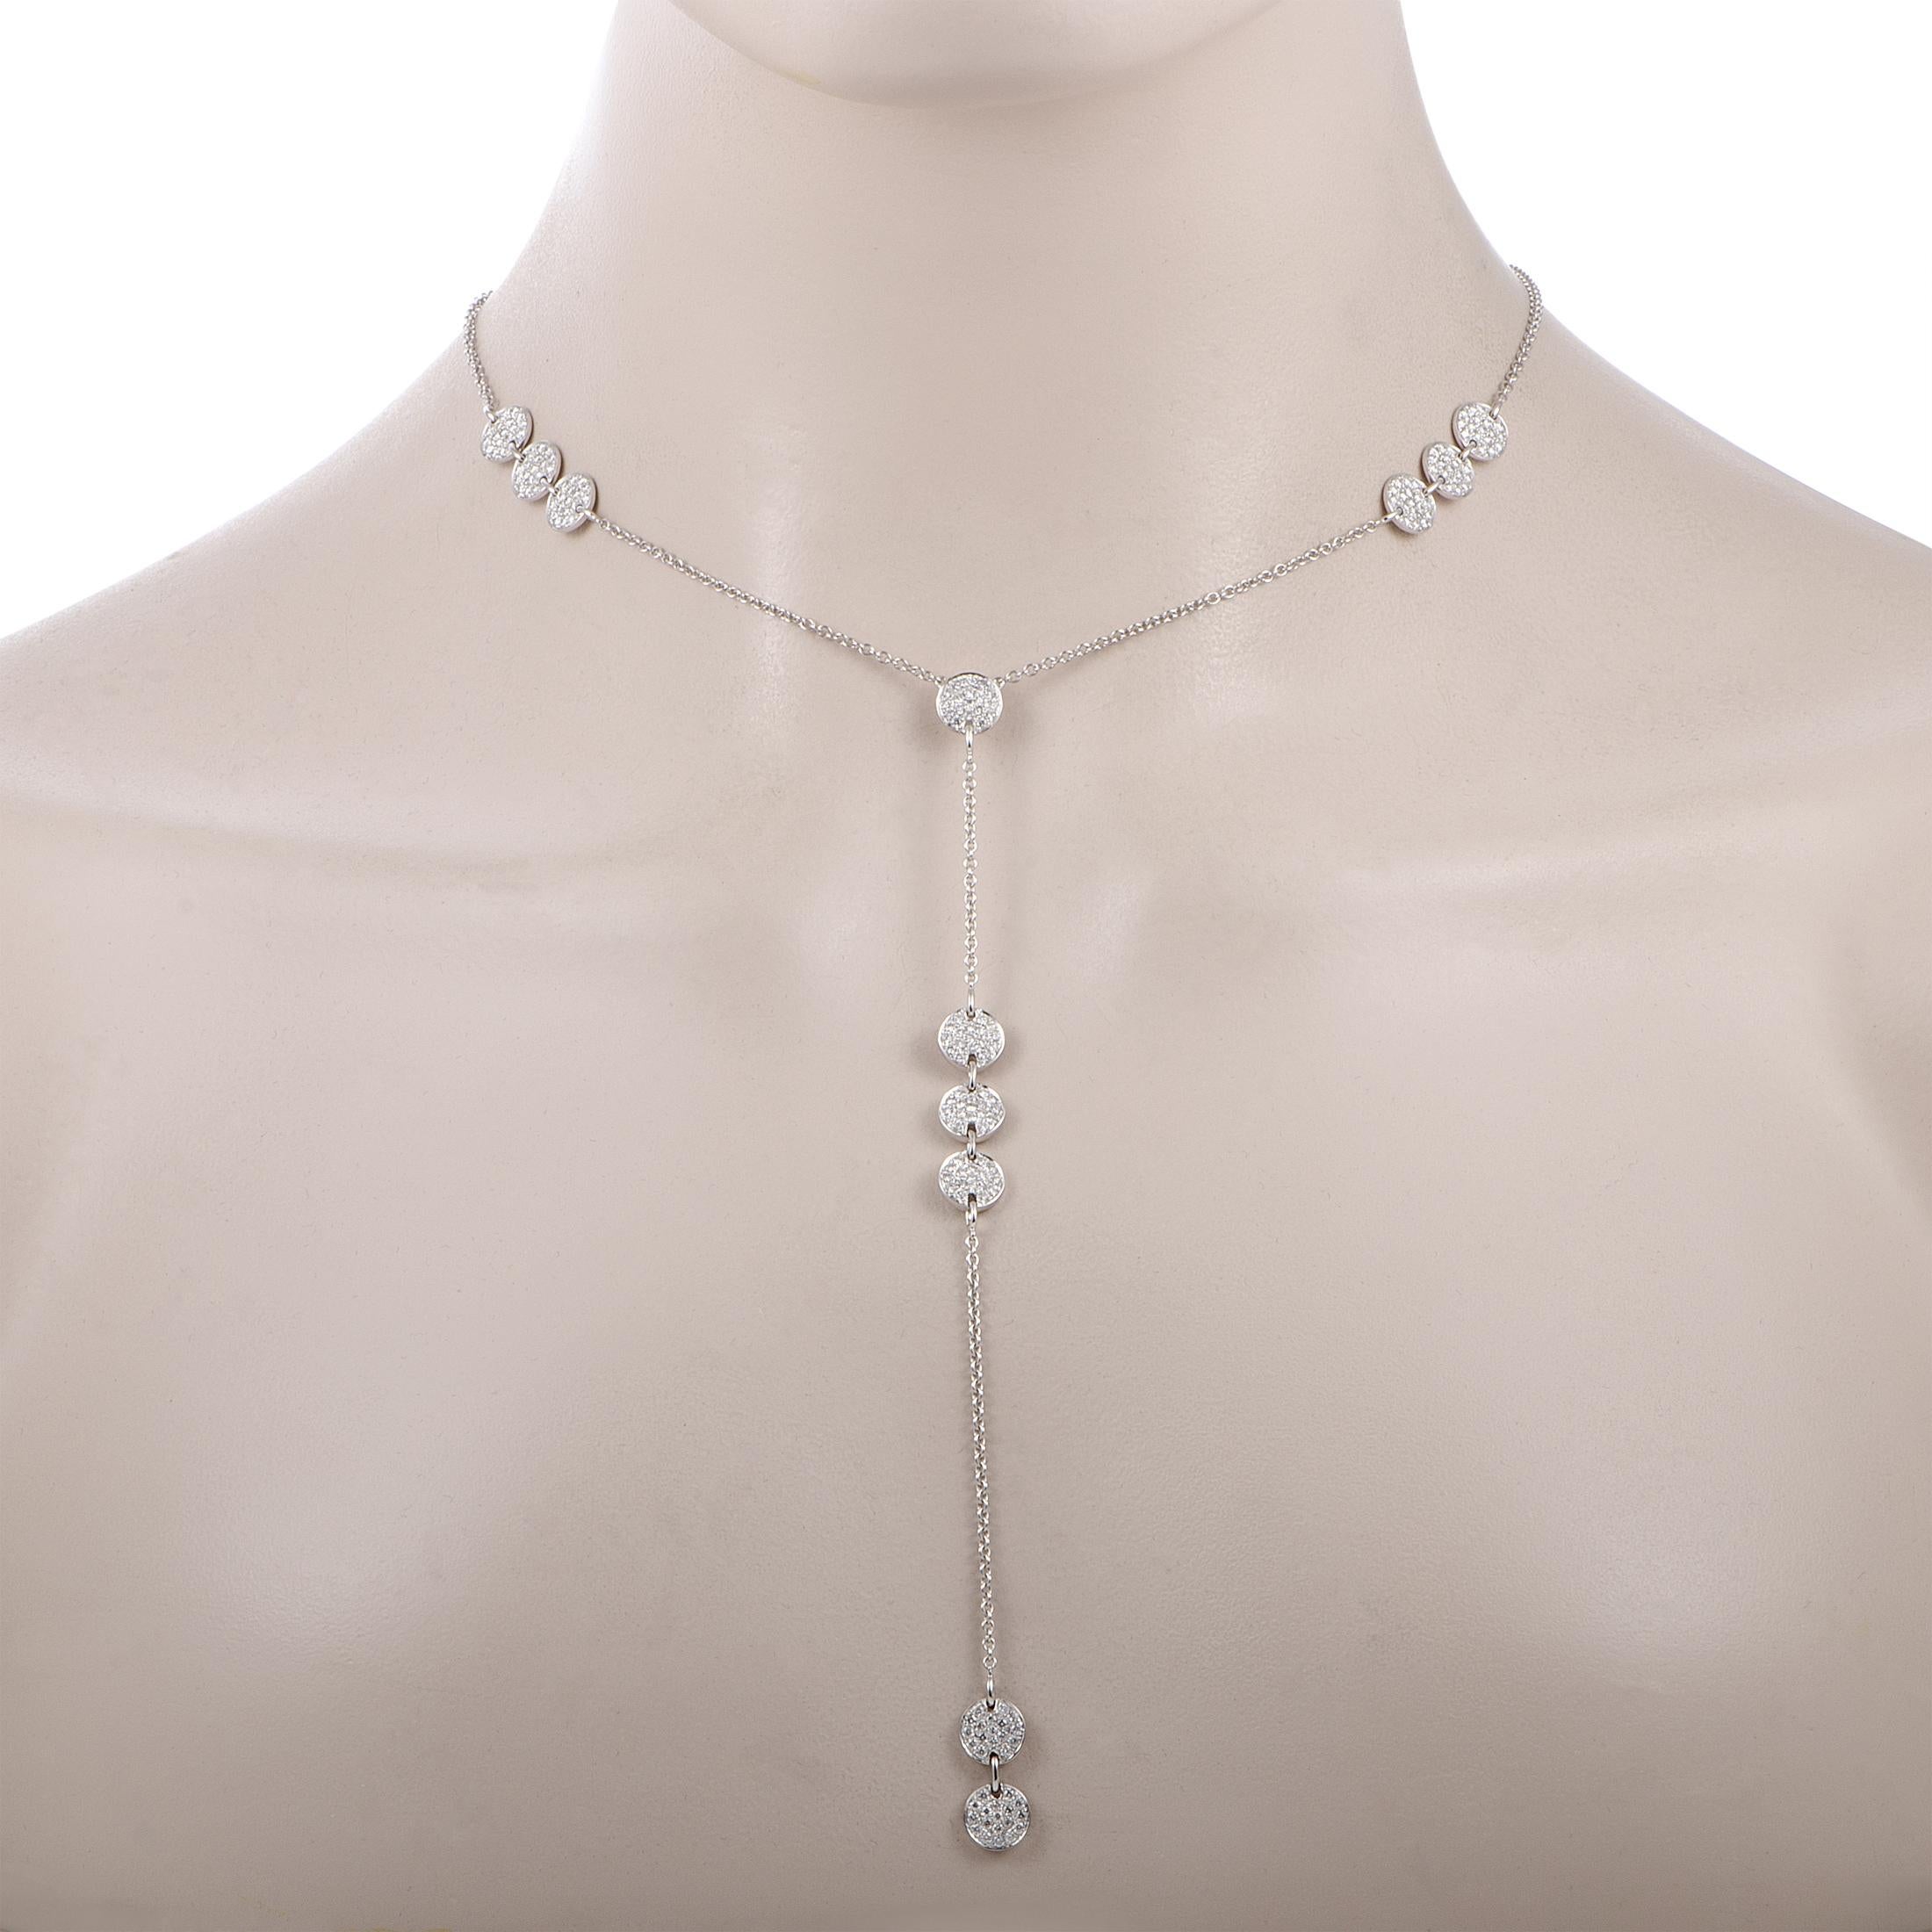 This LB Exclusive necklace is made of 18K white gold and embellished with diamonds that total 2.90 carats. Weighing 13.2 grams, the necklace is presented with a 19.00” chain featuring lobster claw closure and a pendant that measures 5.50” in length